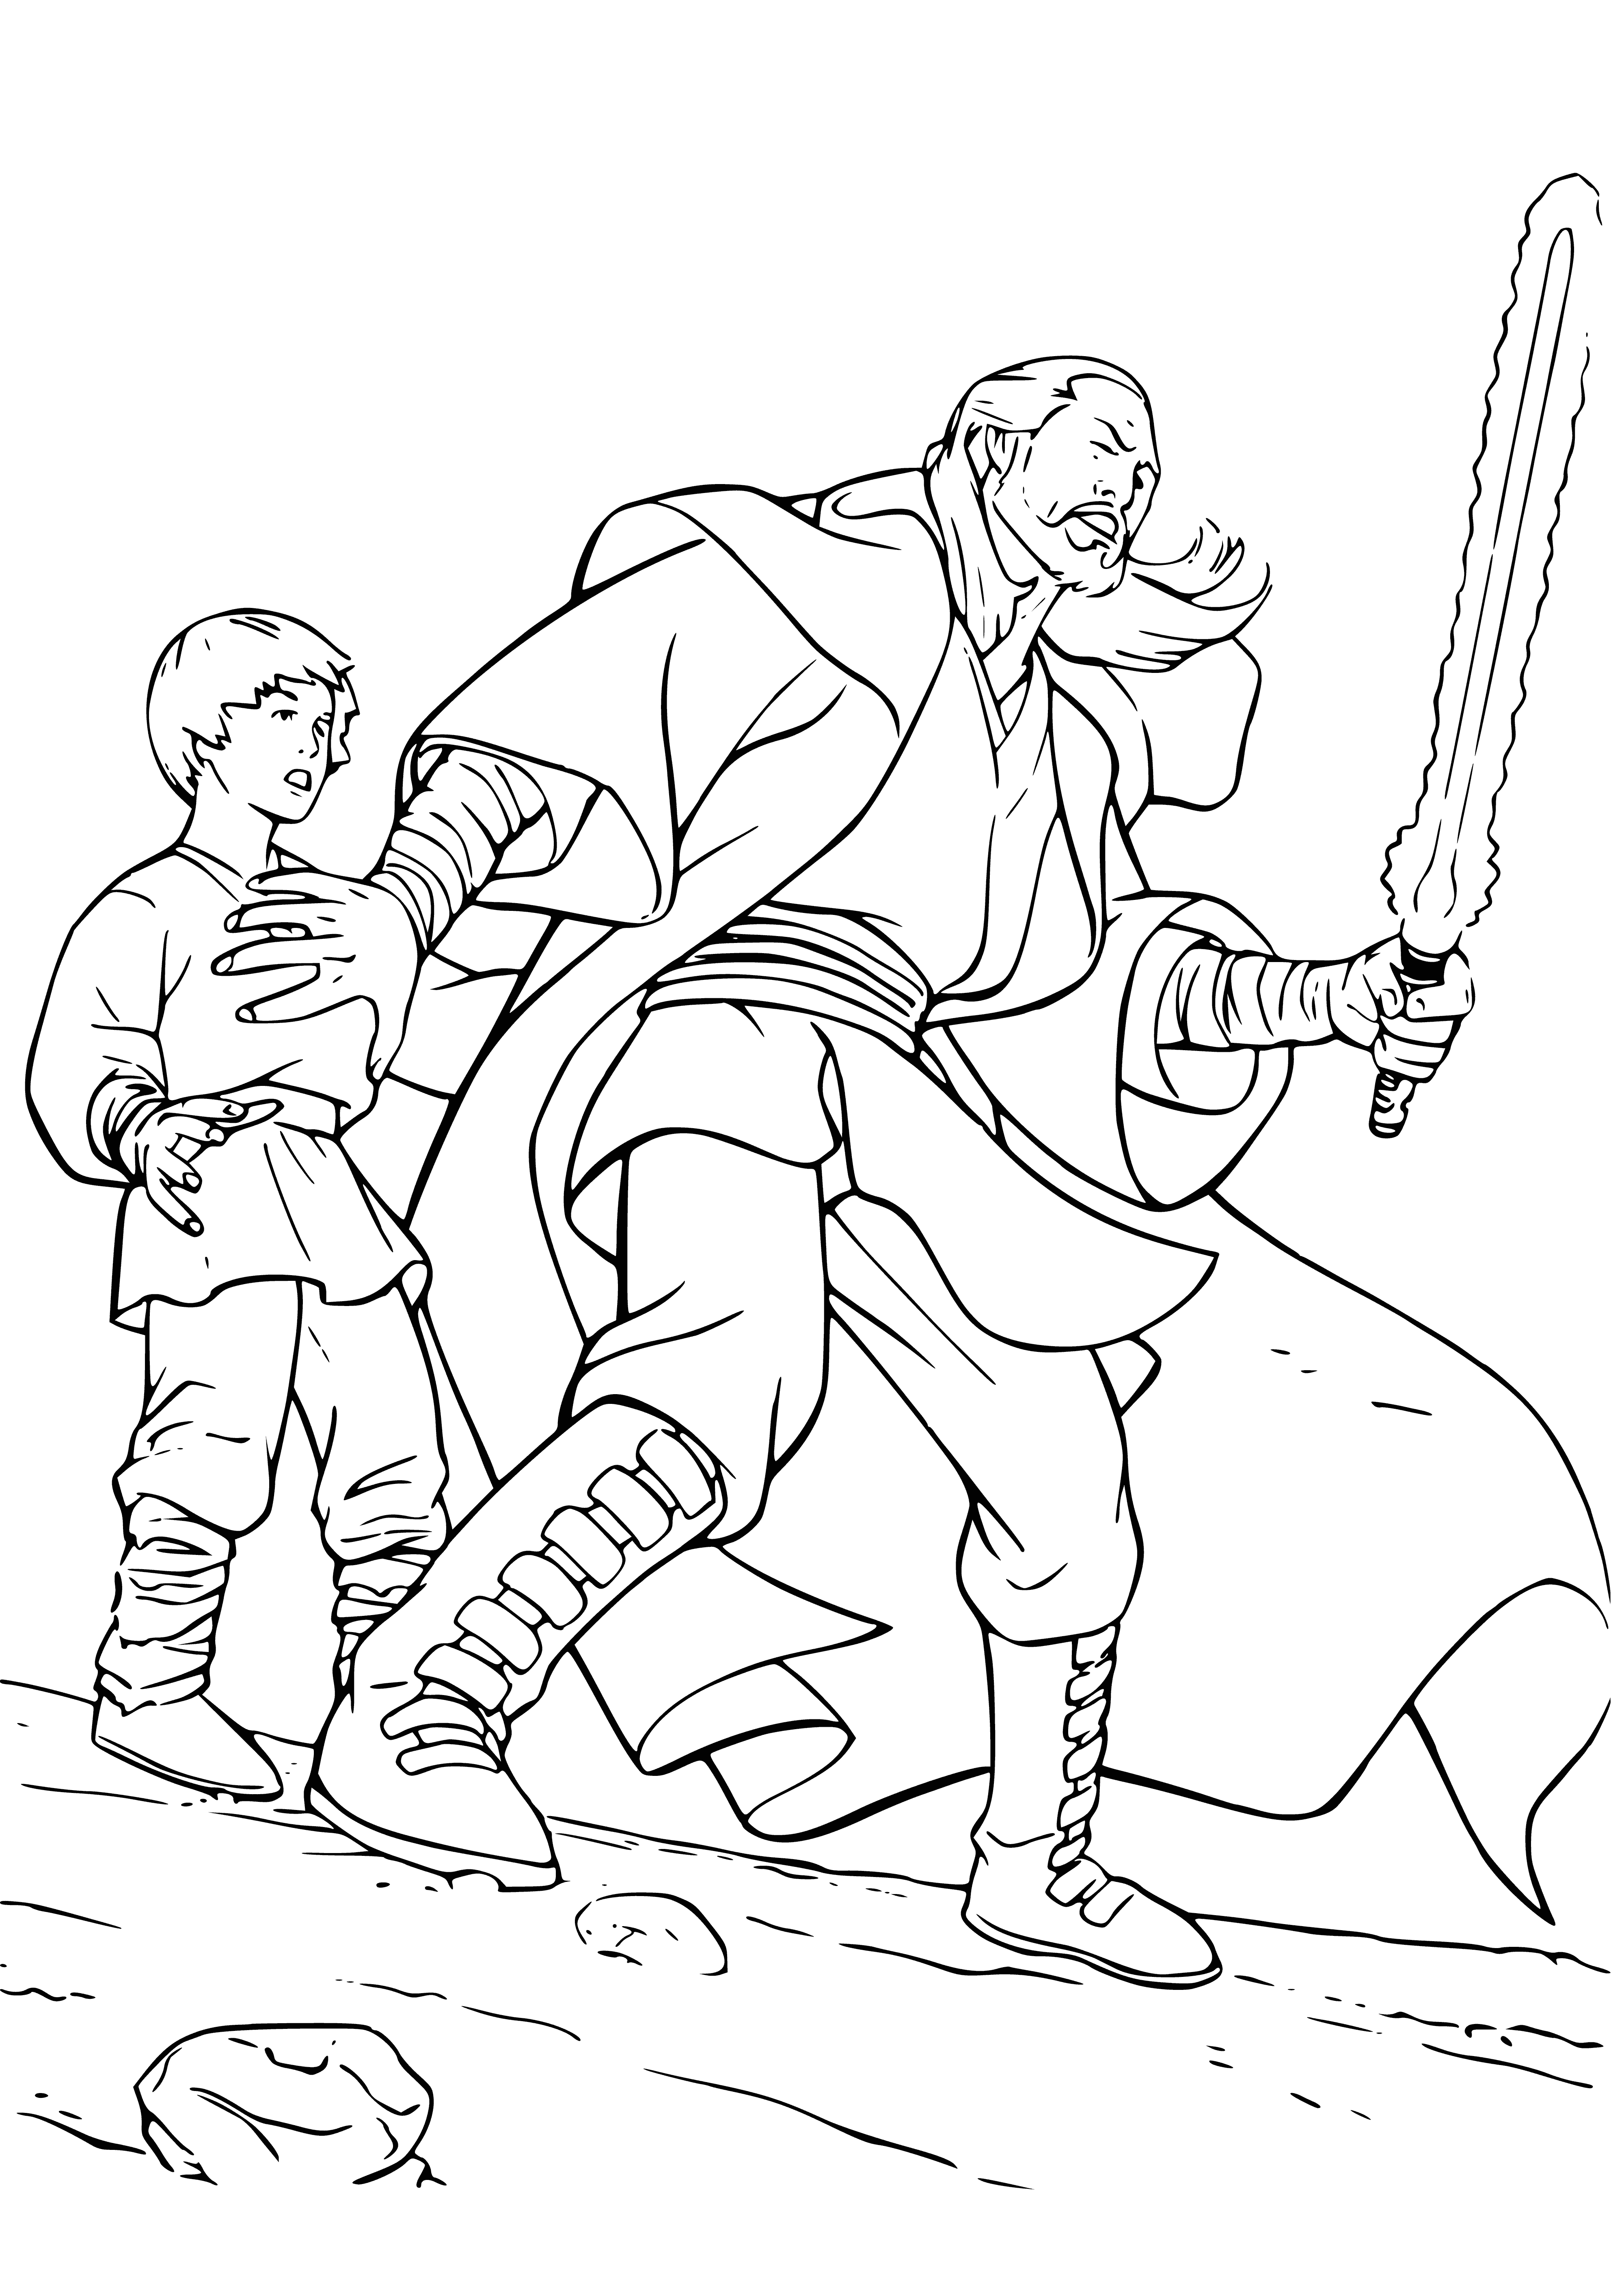 coloring page: Man in brown robe and light scarf wields blue lightsaber with boy, droid nearby. Boy wears white shirt, brown pants. Droid black and white. #StarWars